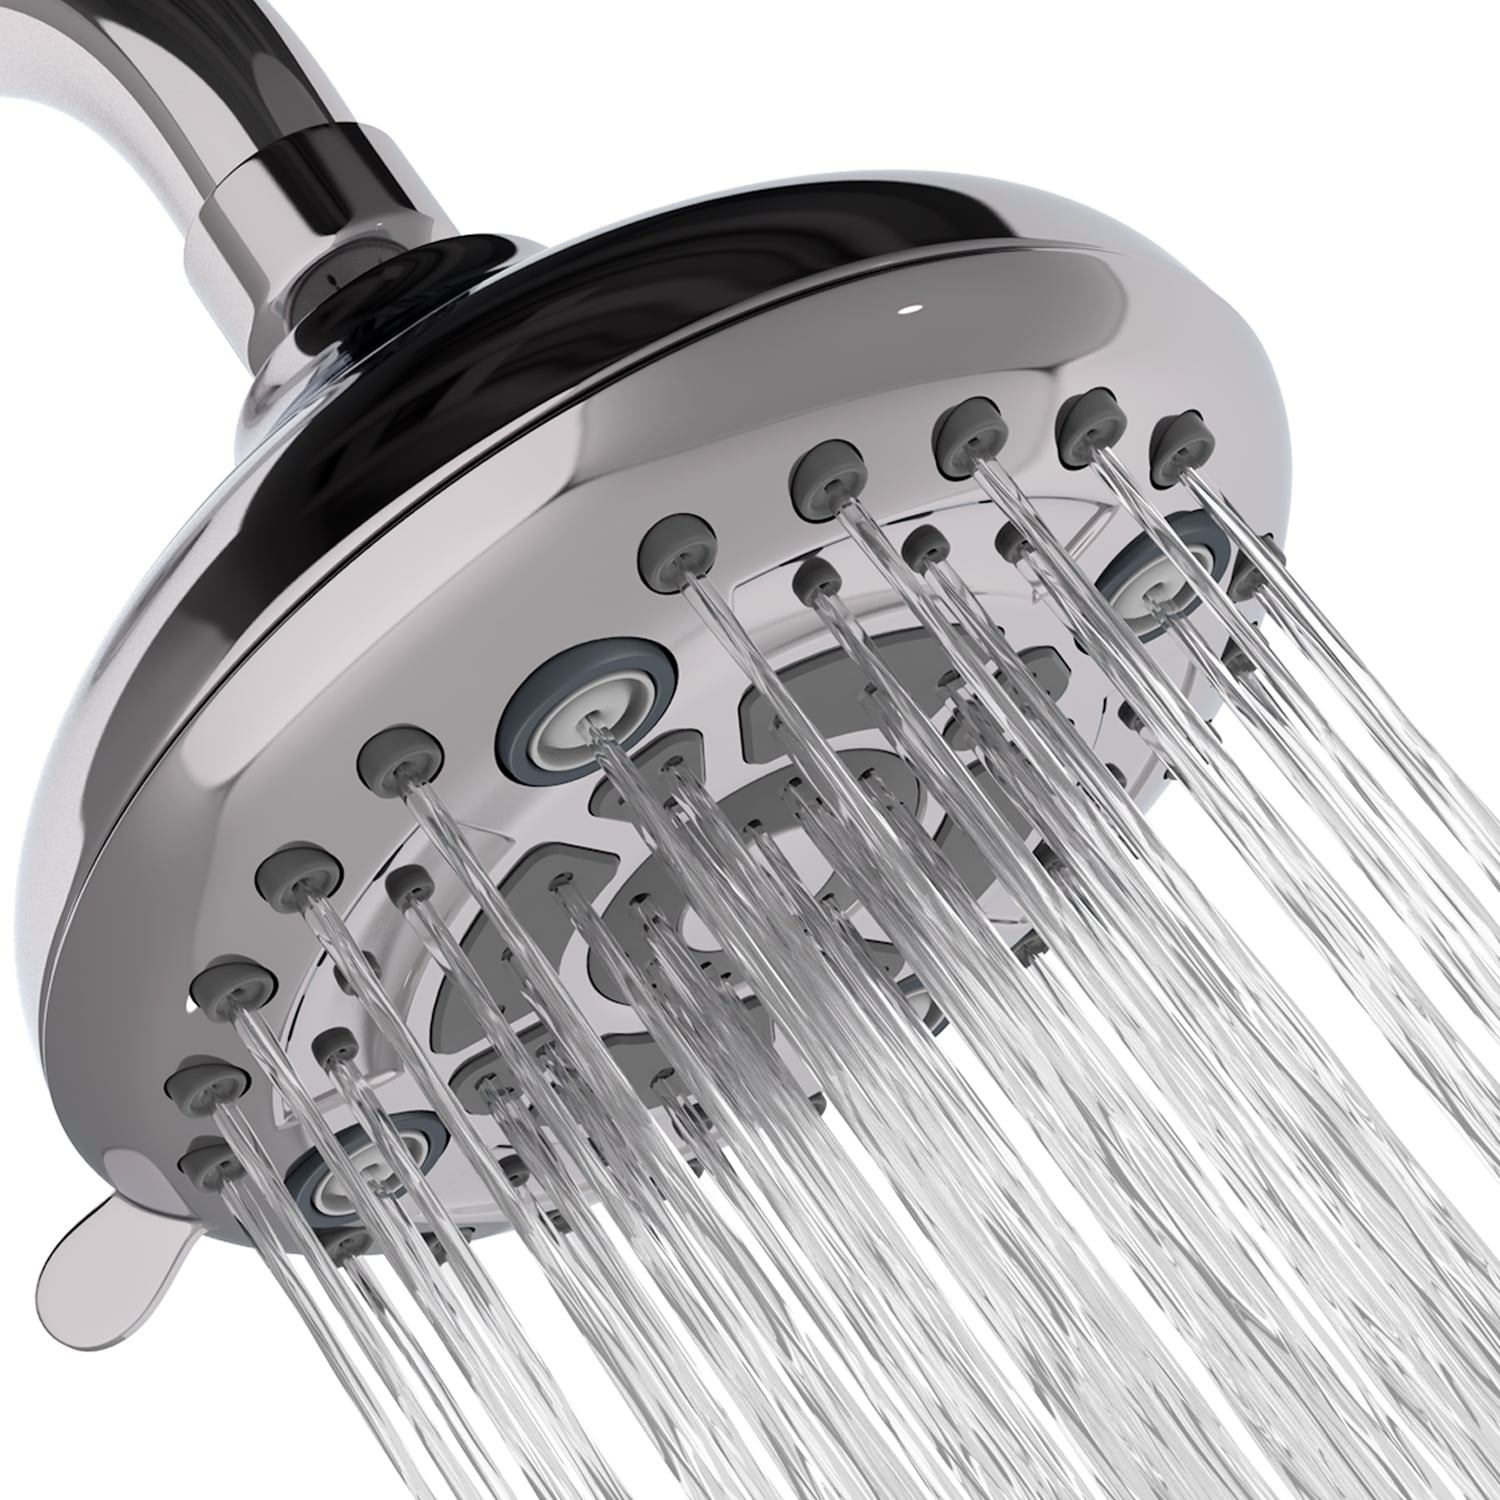 TurboSpa 3 Inch High Pressure Shower Head w/Flow Restrictor Melts Stress into at 